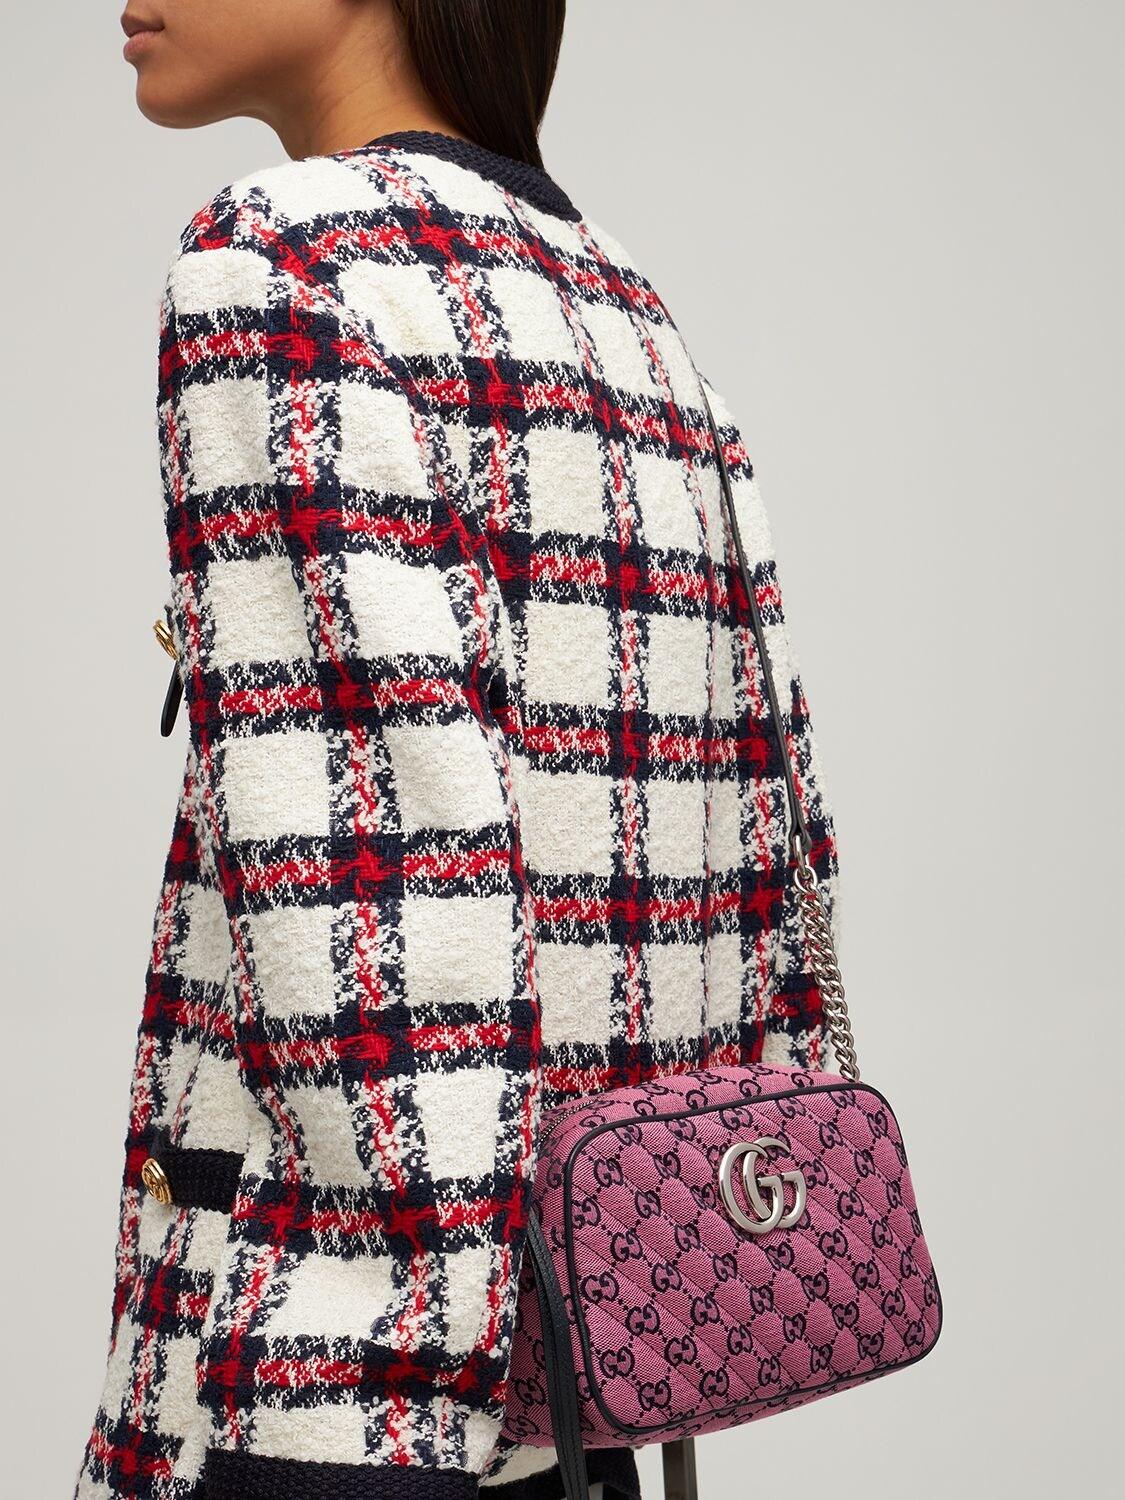 Gucci GG Marmont Diagonal Quilted Pink Fabric GG Canvas Shoulder